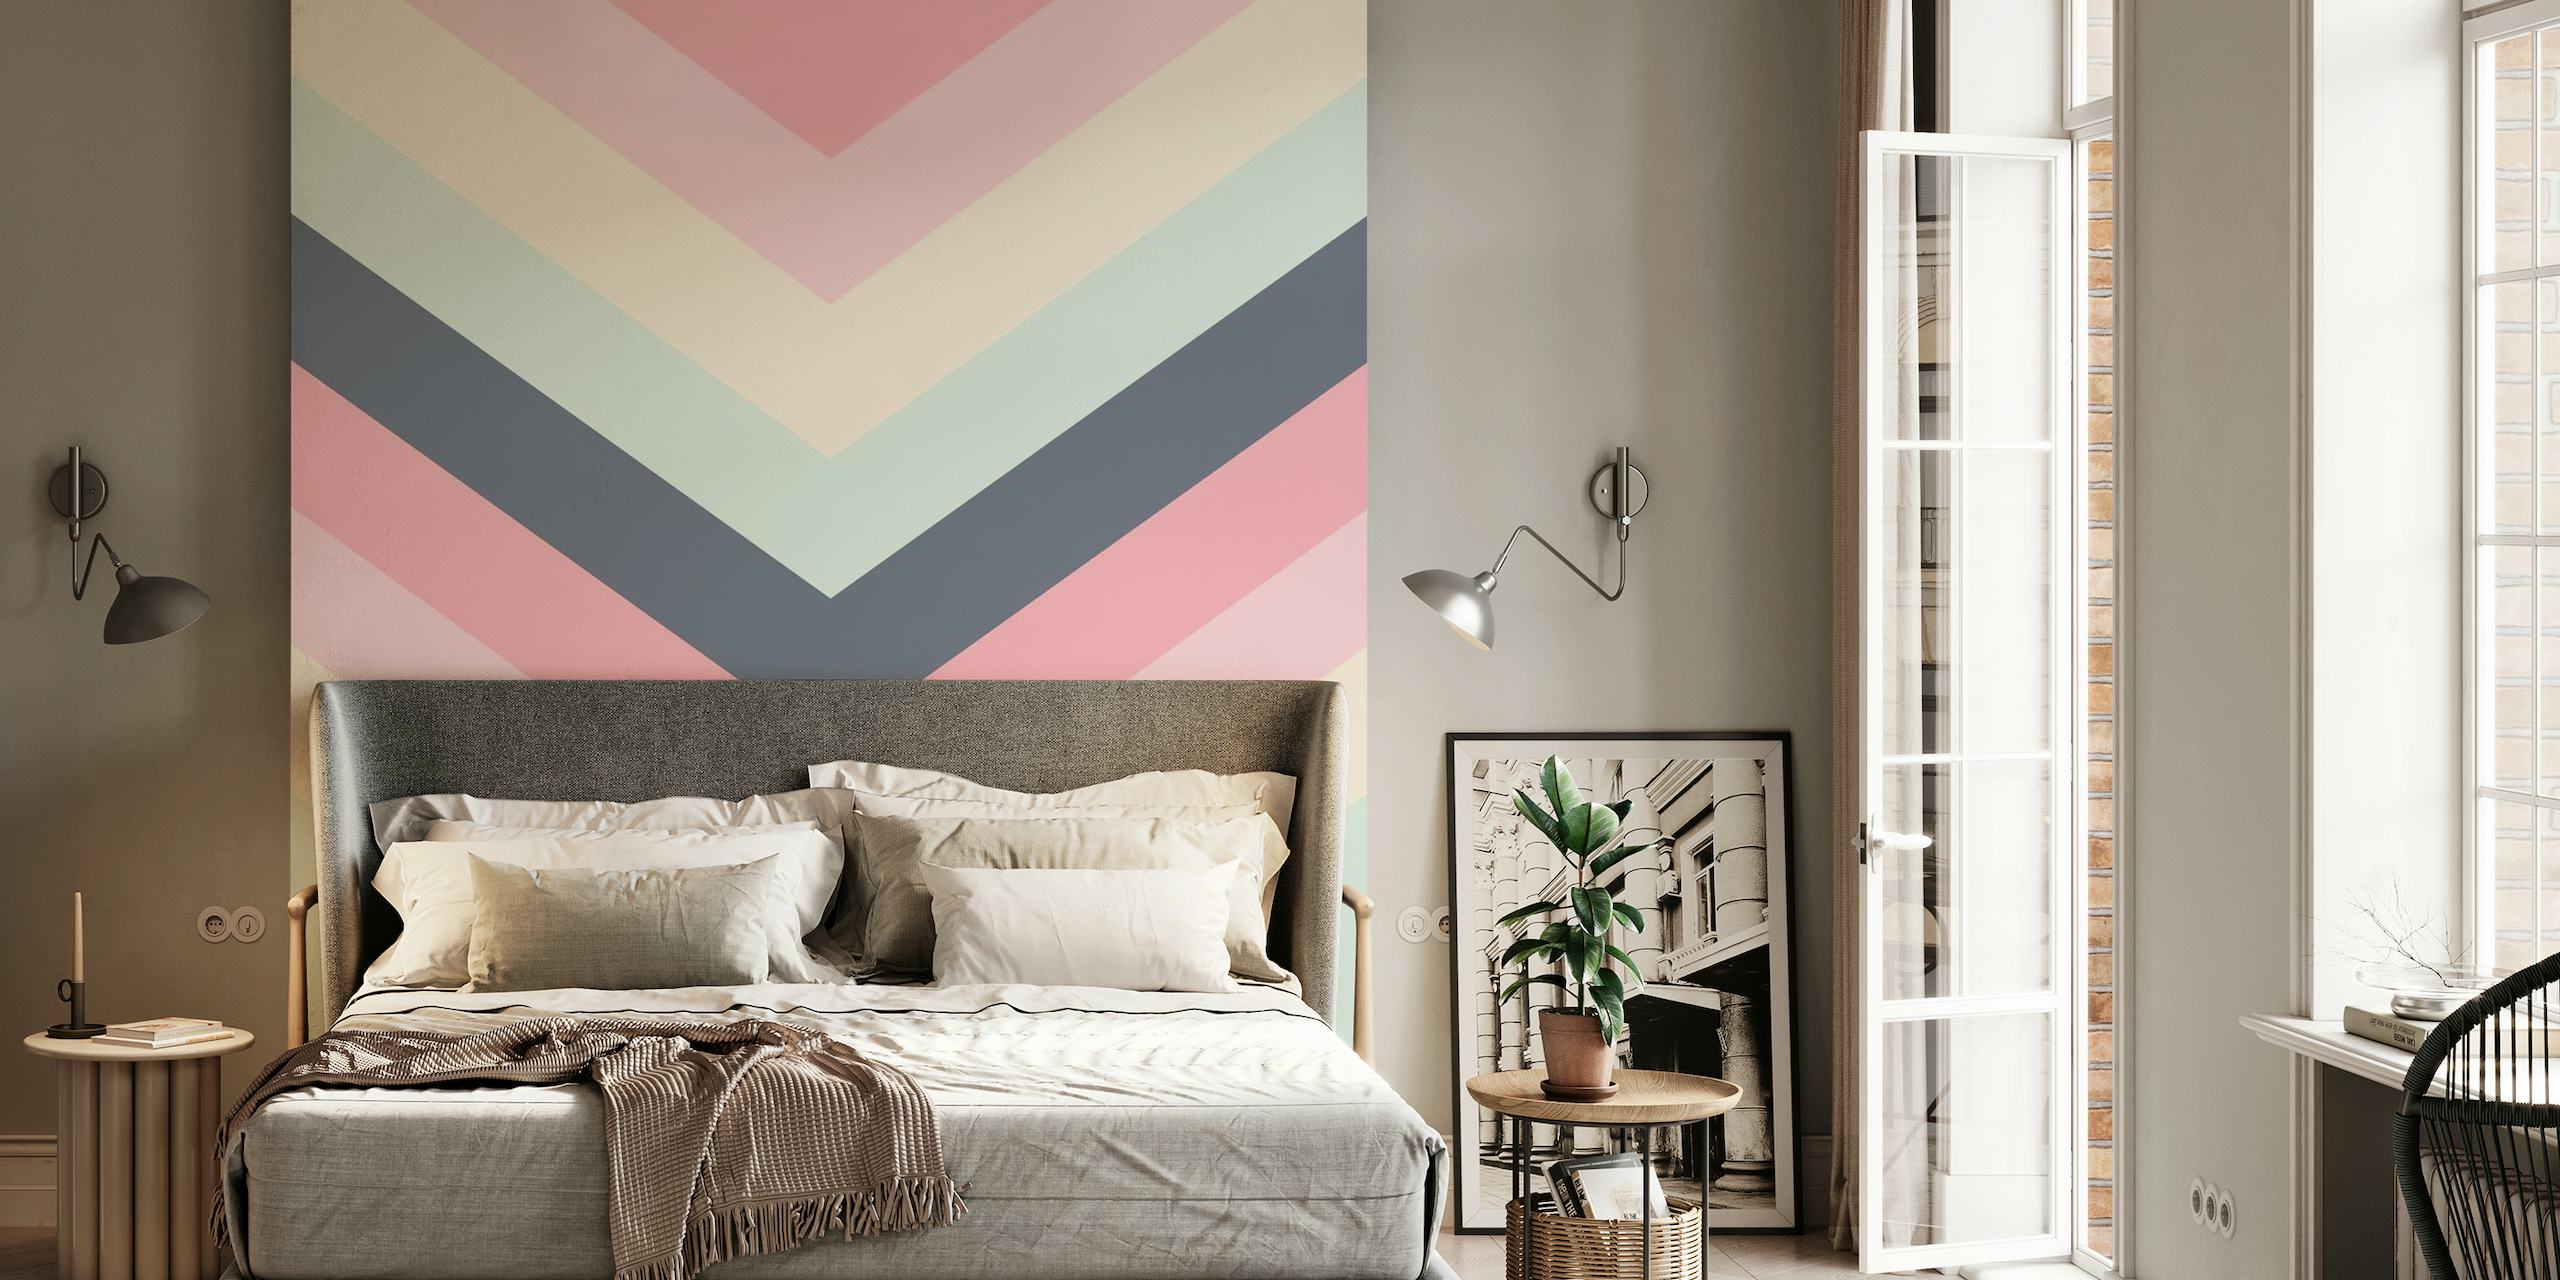 Retro Summer Chevron patterned wall mural featuring pastel colors and a vintage design